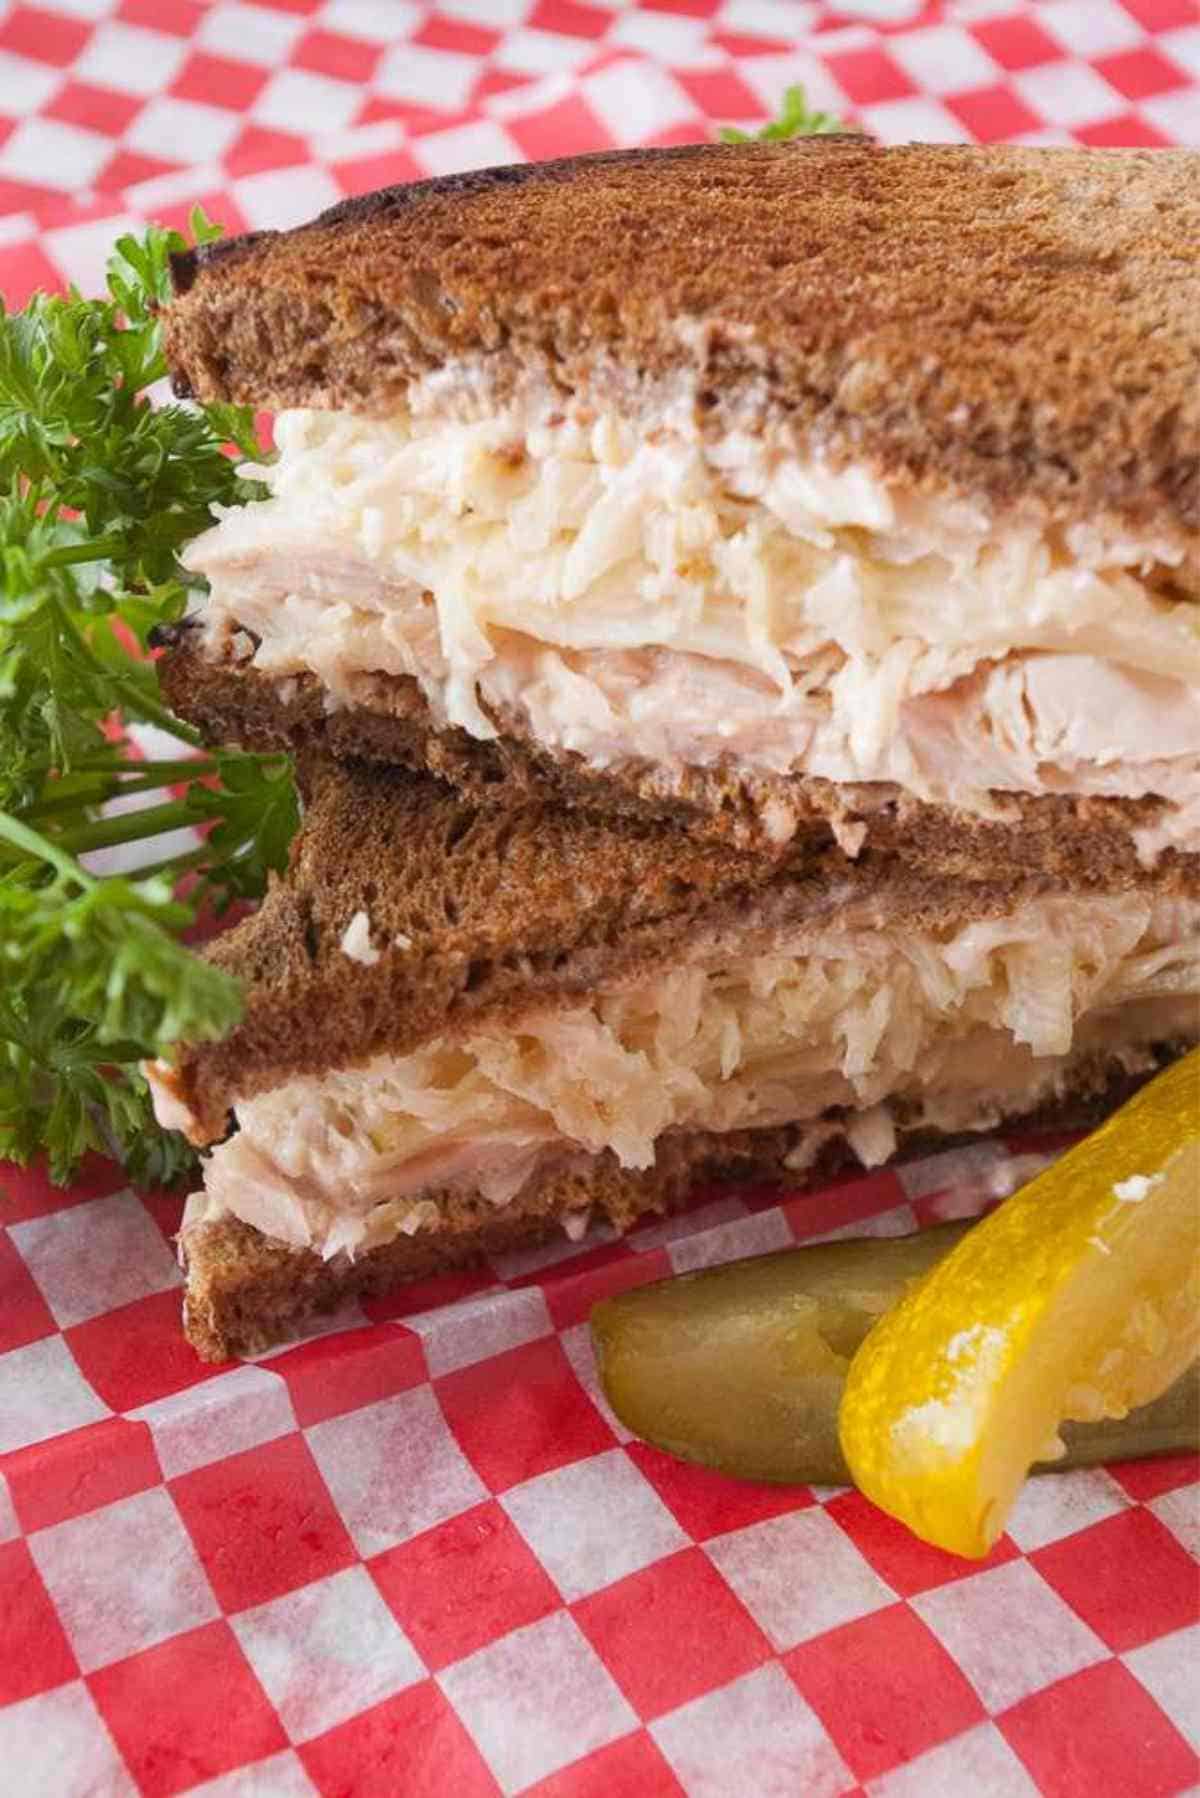 Turkey Reubens cut it half and served with a deli pickle.